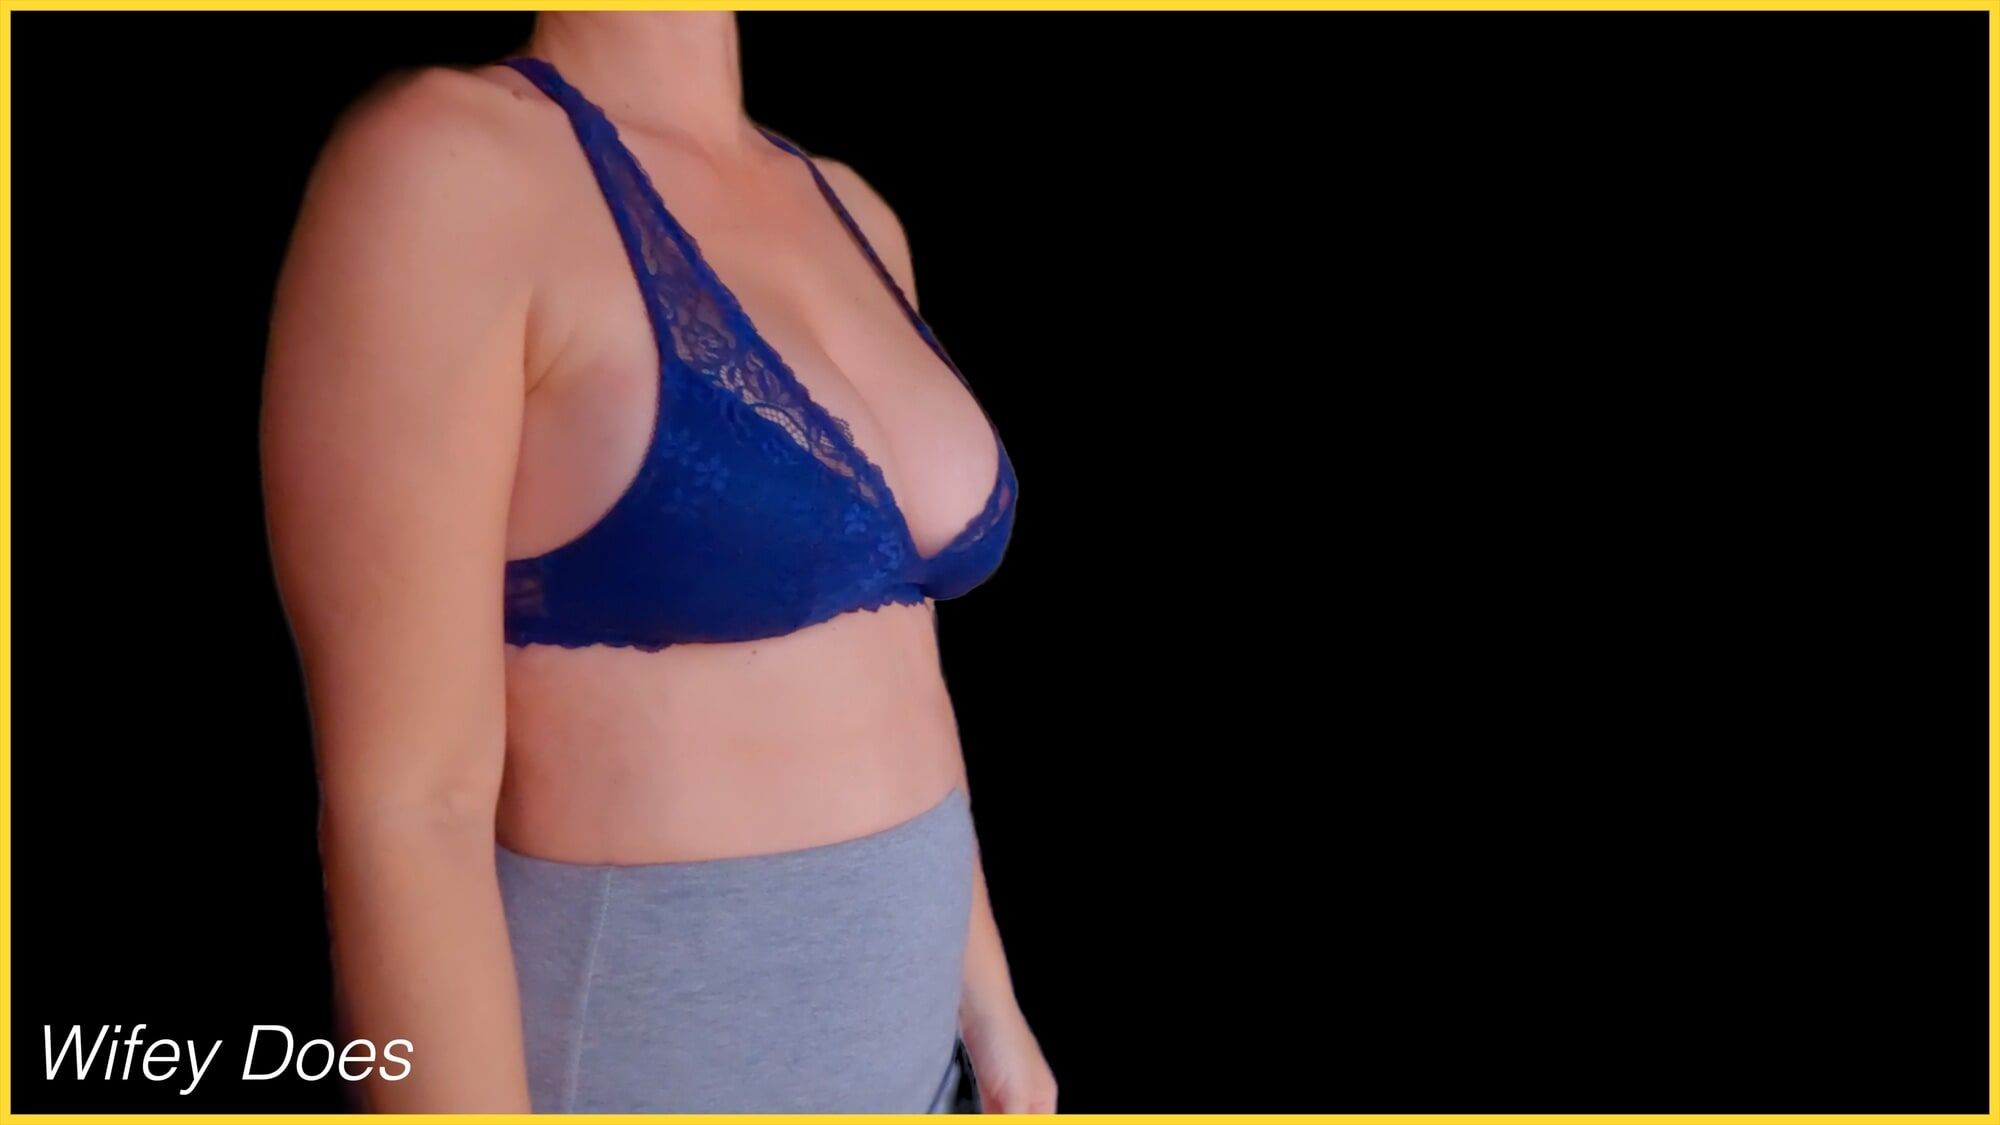 Wife stuns in lacey blue bra #2